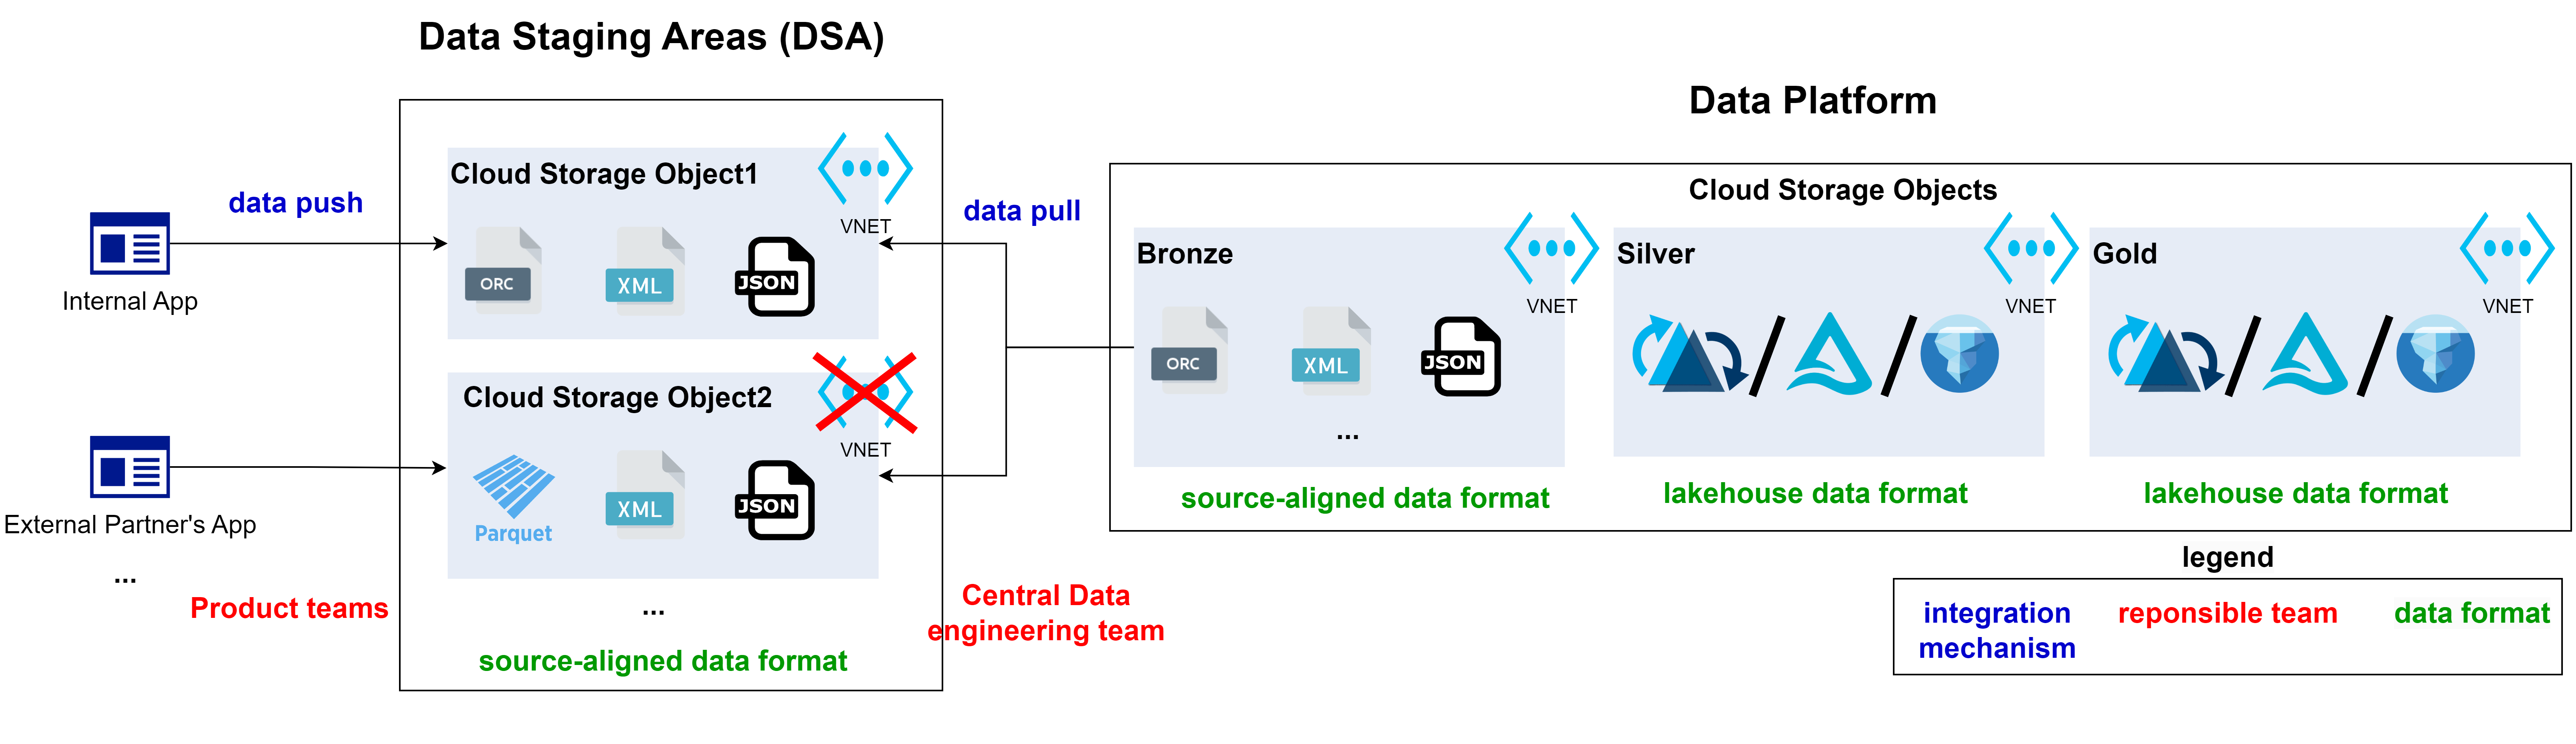 The outline of Data Staging Area concept. Teams responsible for building apps push data to an intermediary storage layer. Central data engineering teams pulls data from there into central Data Platform.